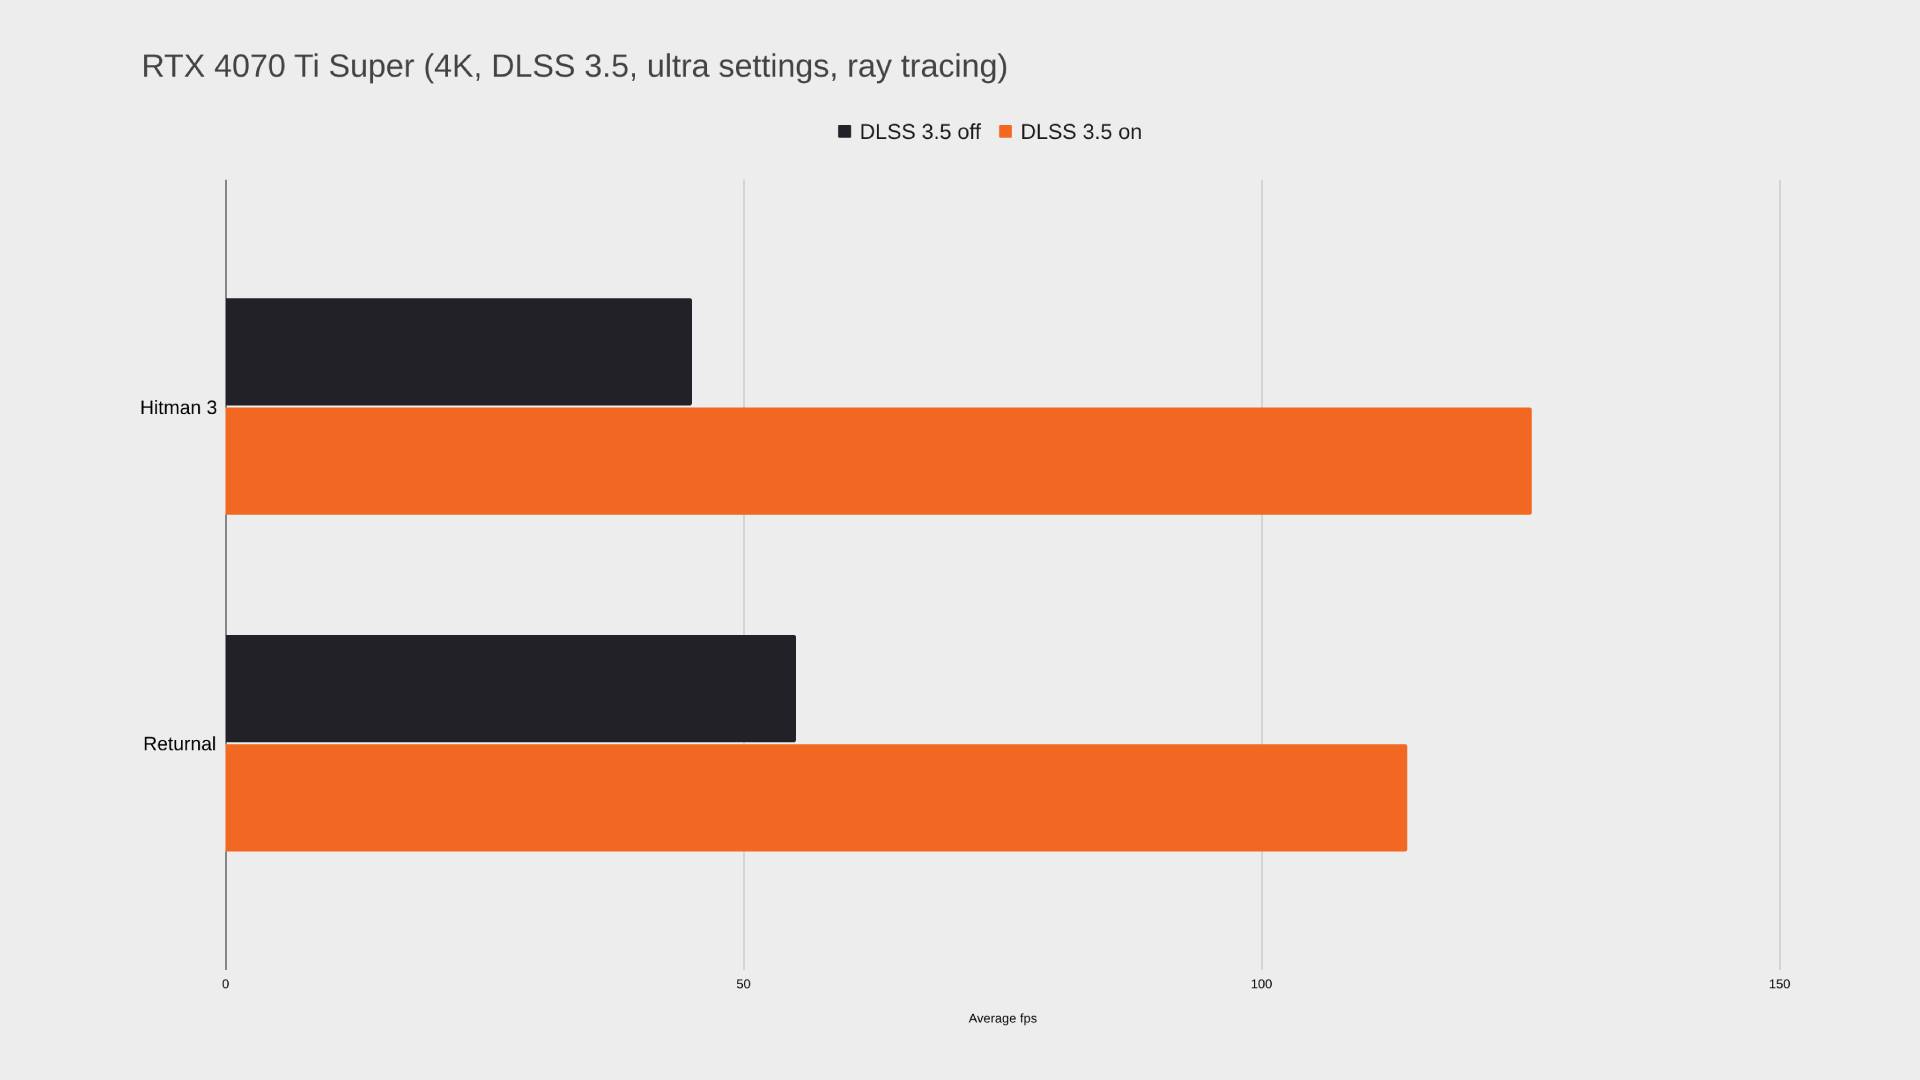 Orange and black bar graph with RTX 4070 Ti DLSS 3.5 benchmarks